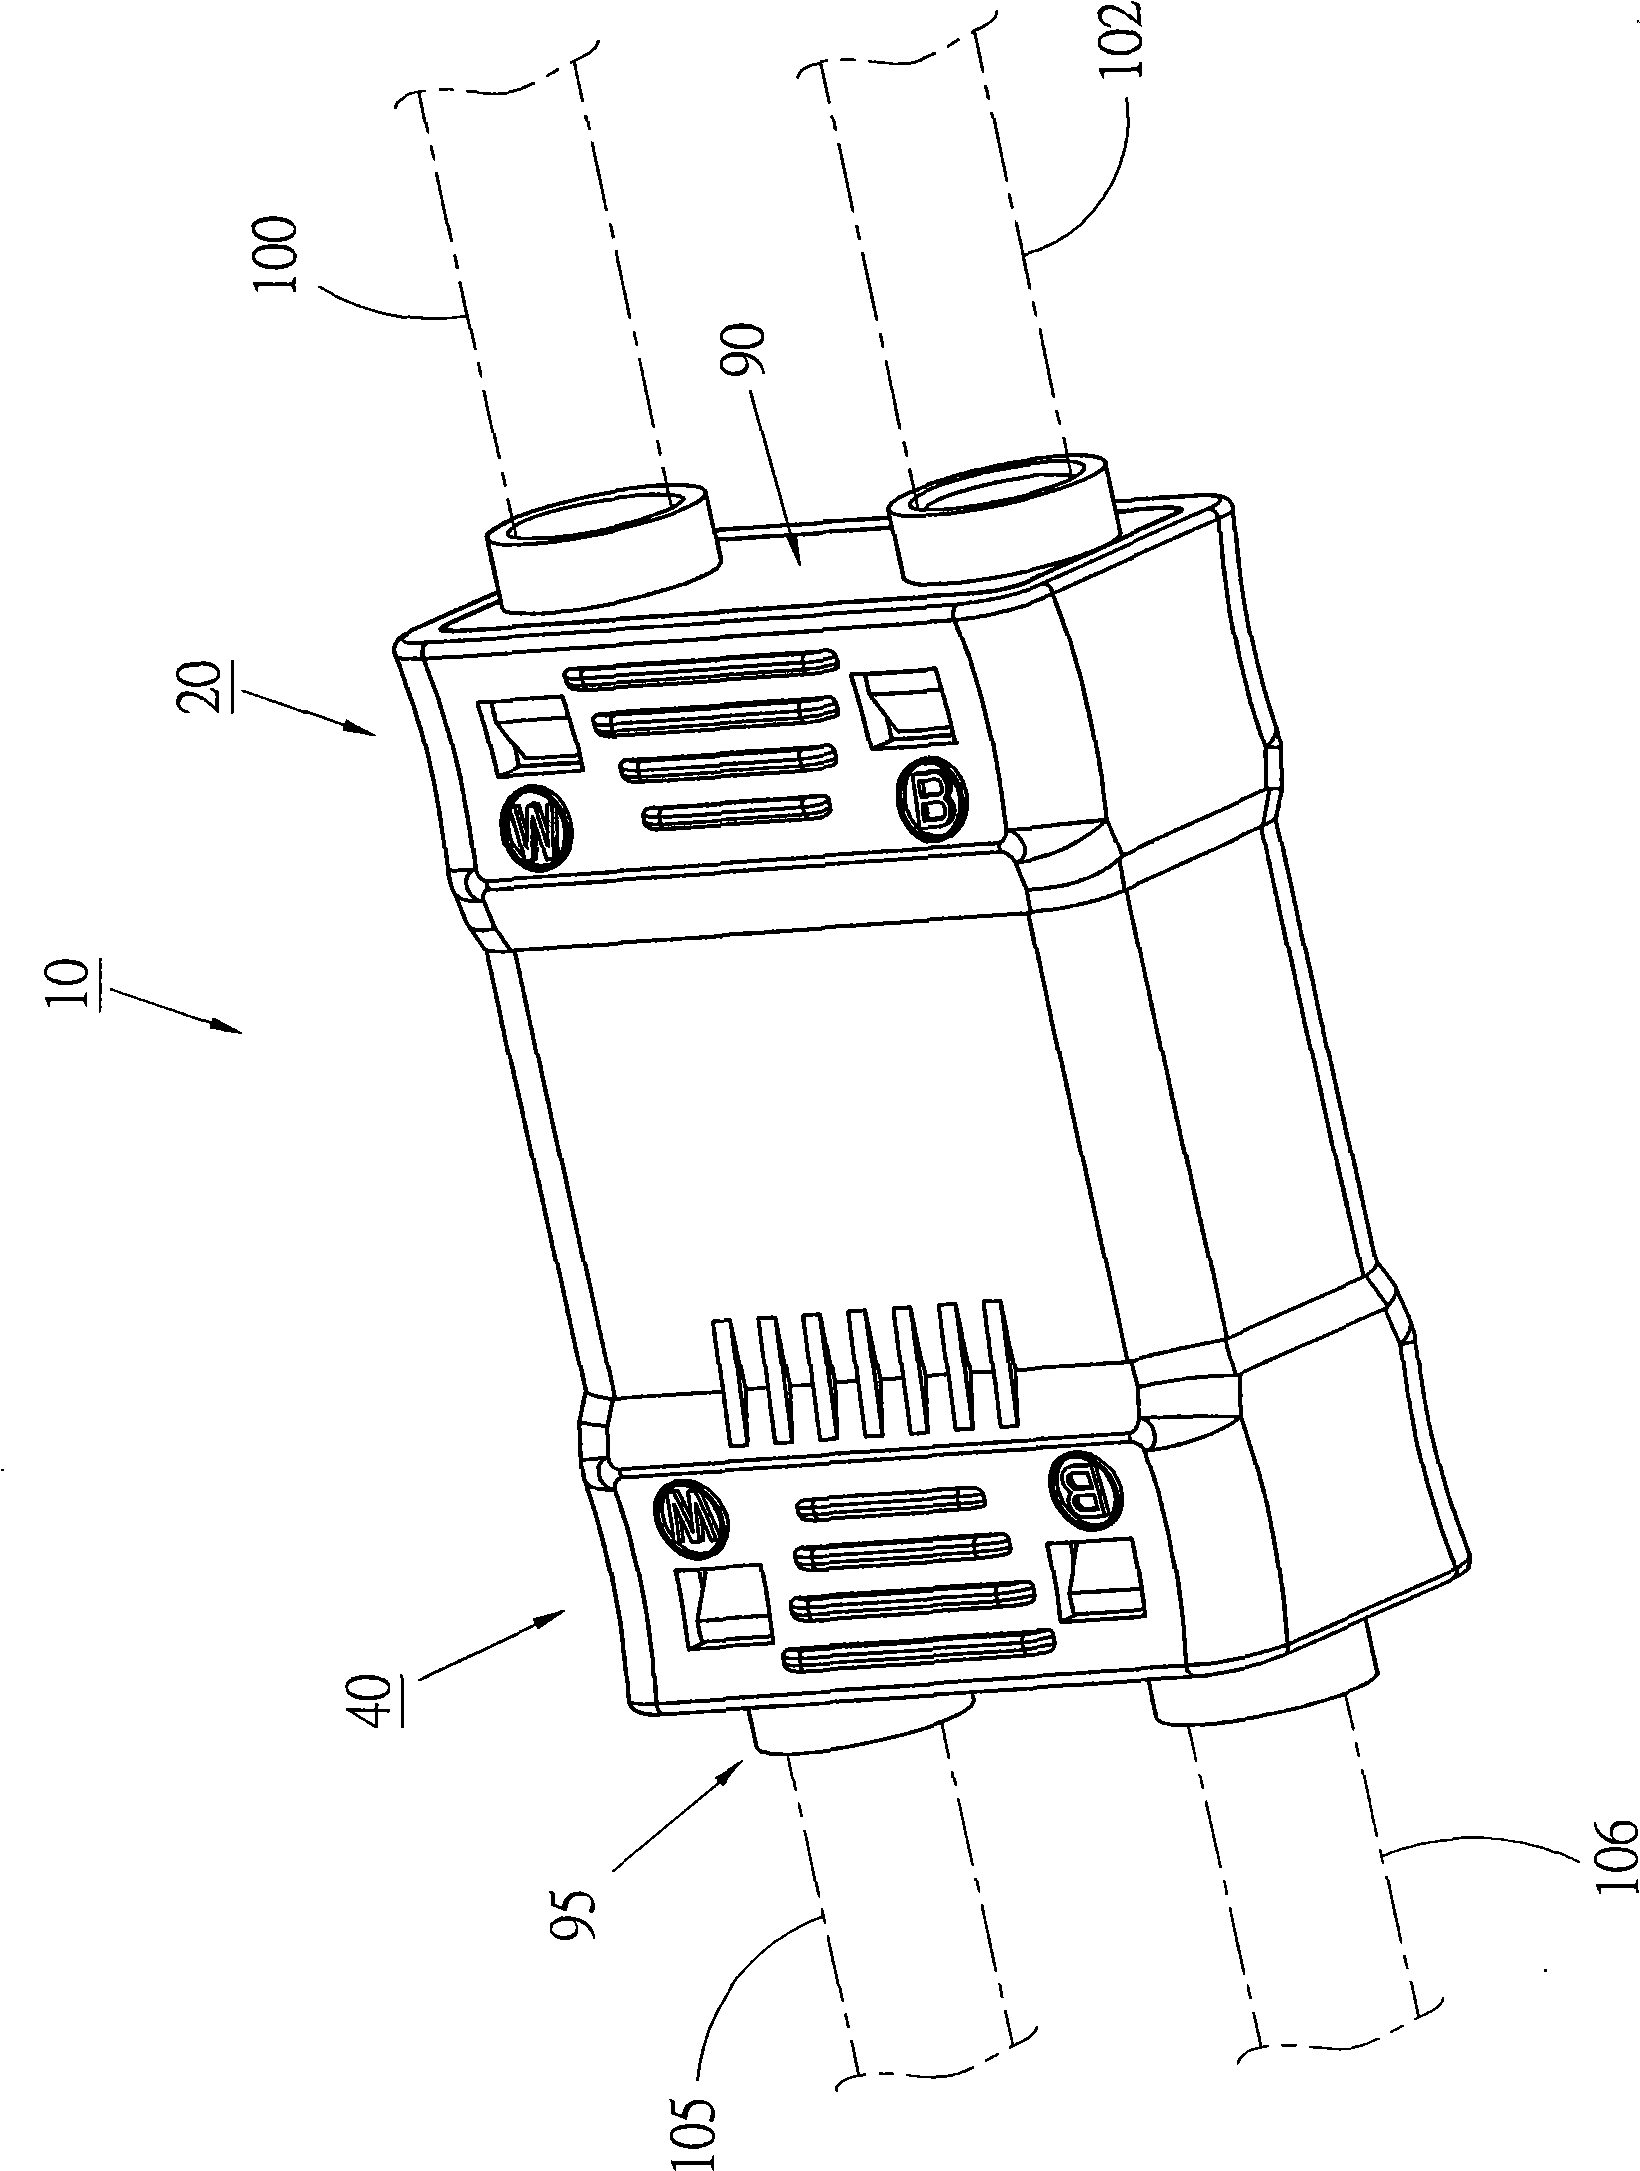 Circuit connector